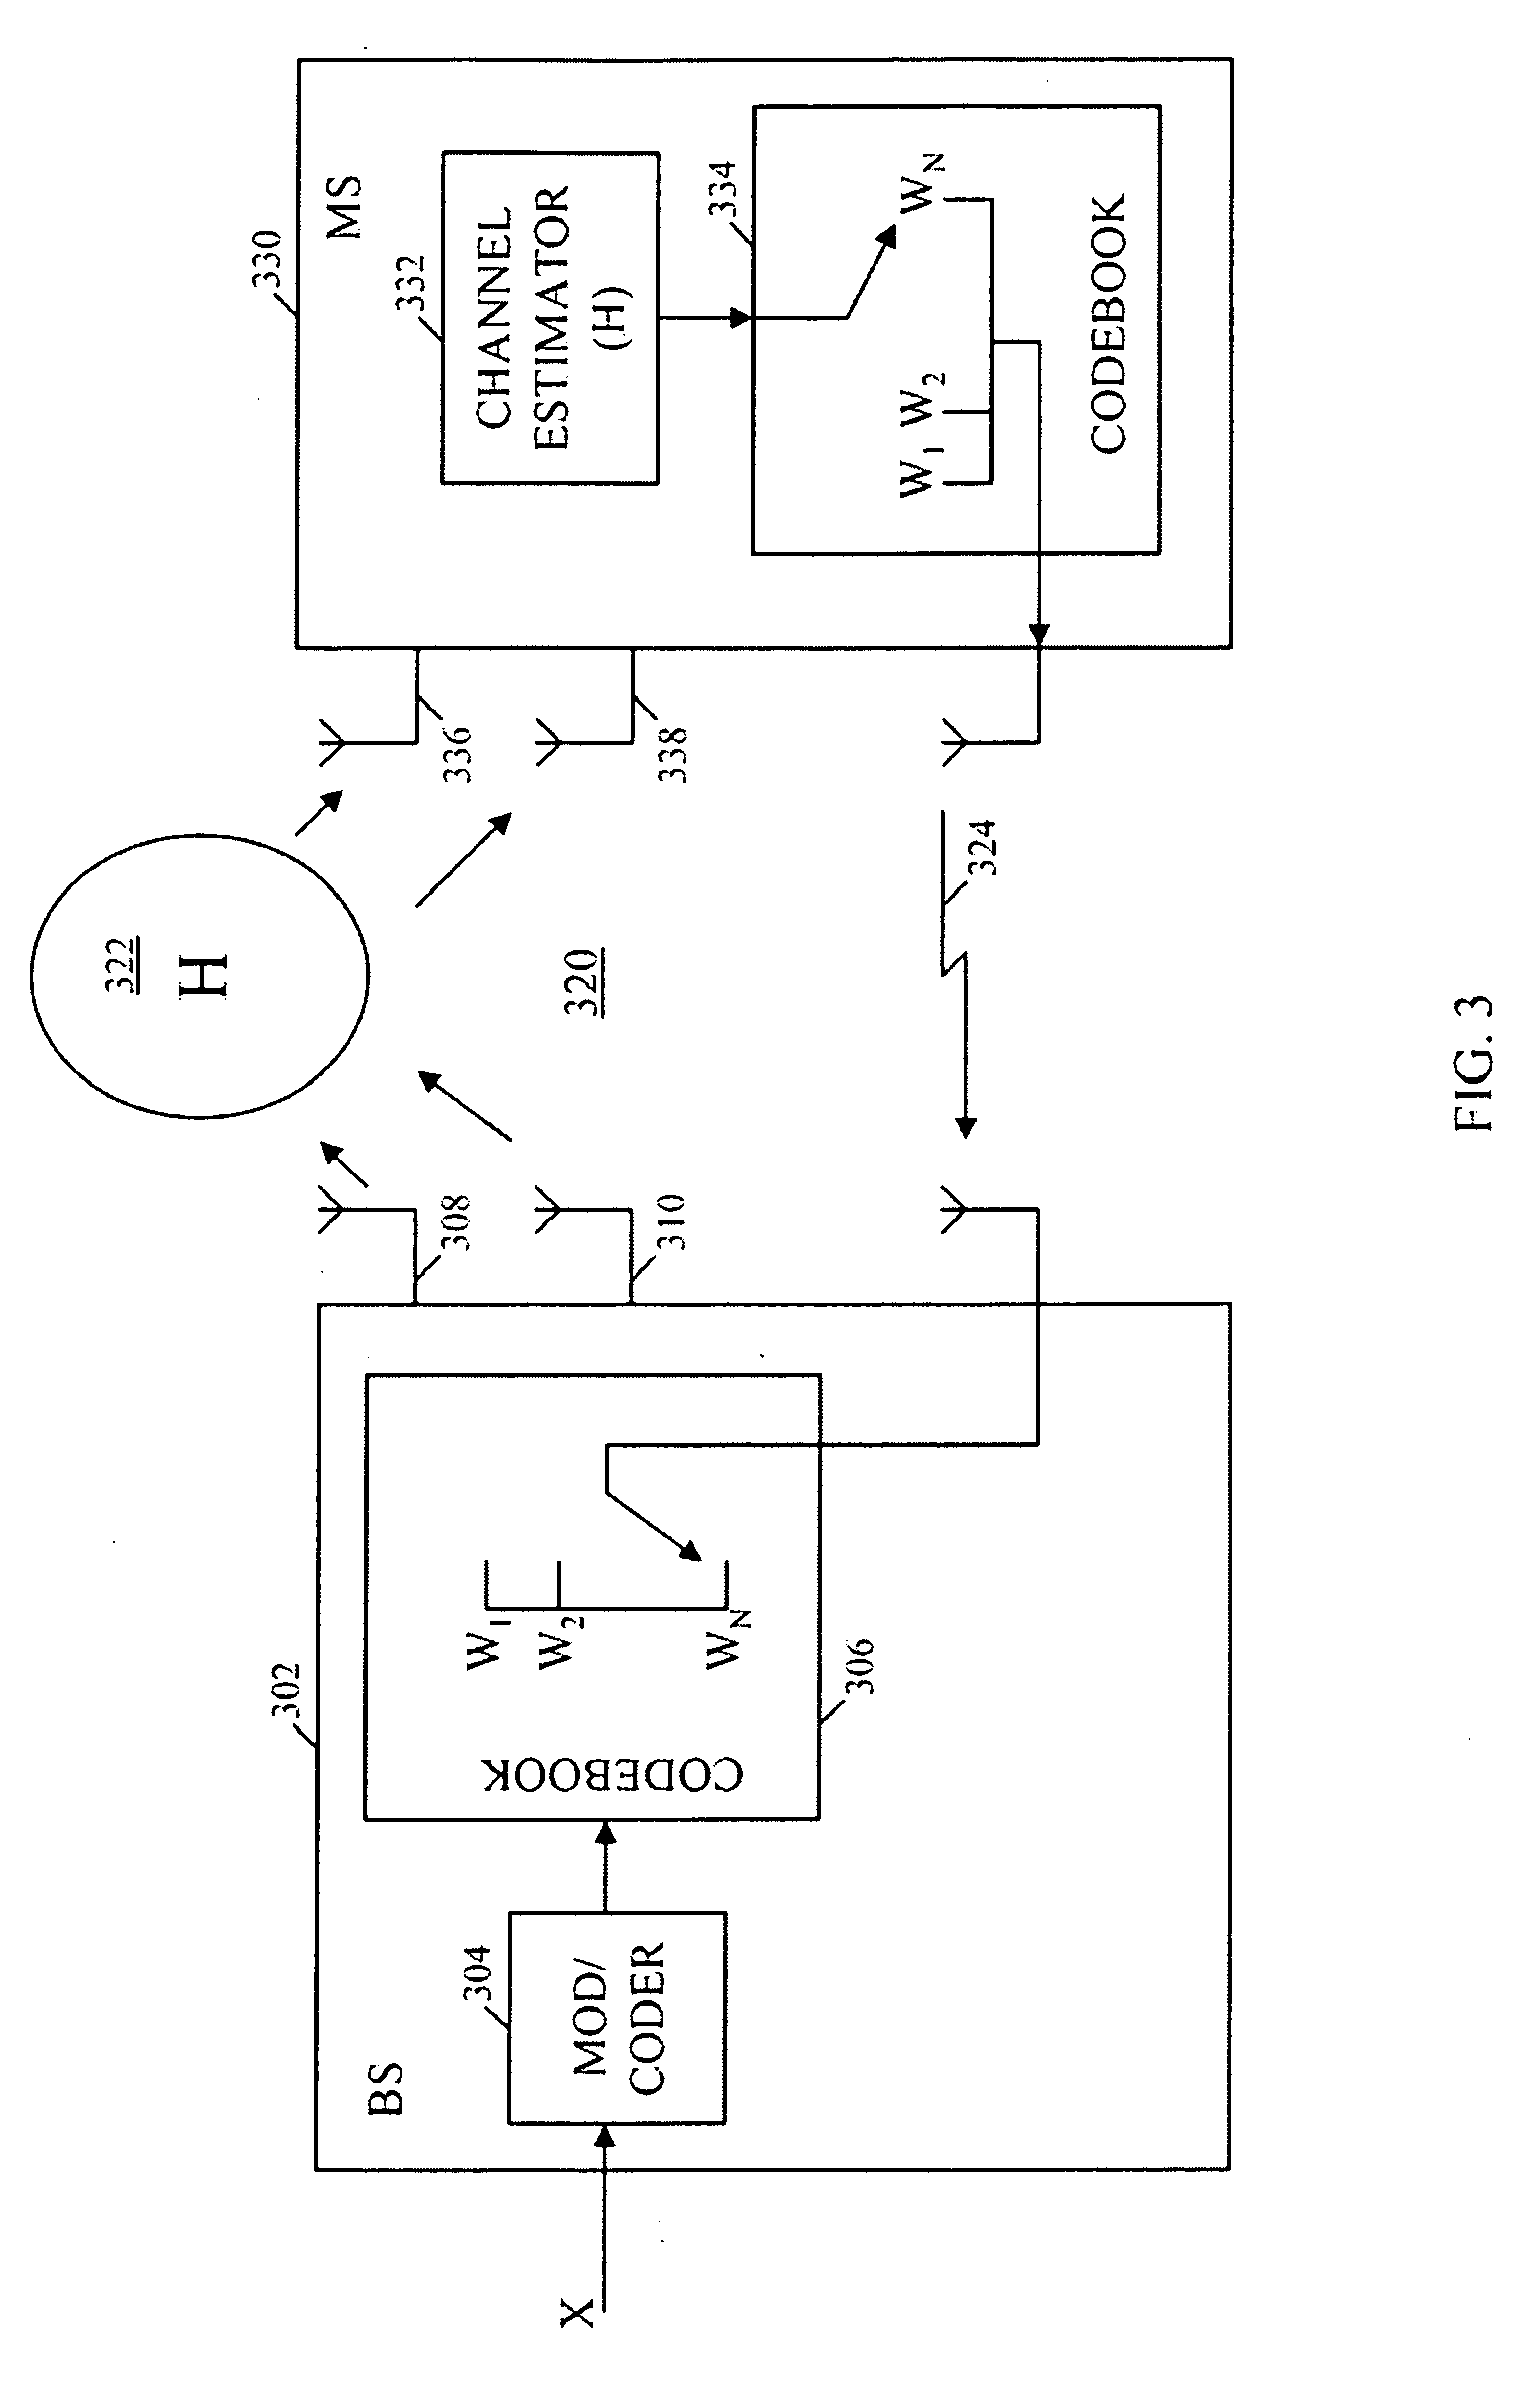 Method and apparatus for codebook-based feedback in a closed loop wireless communication system